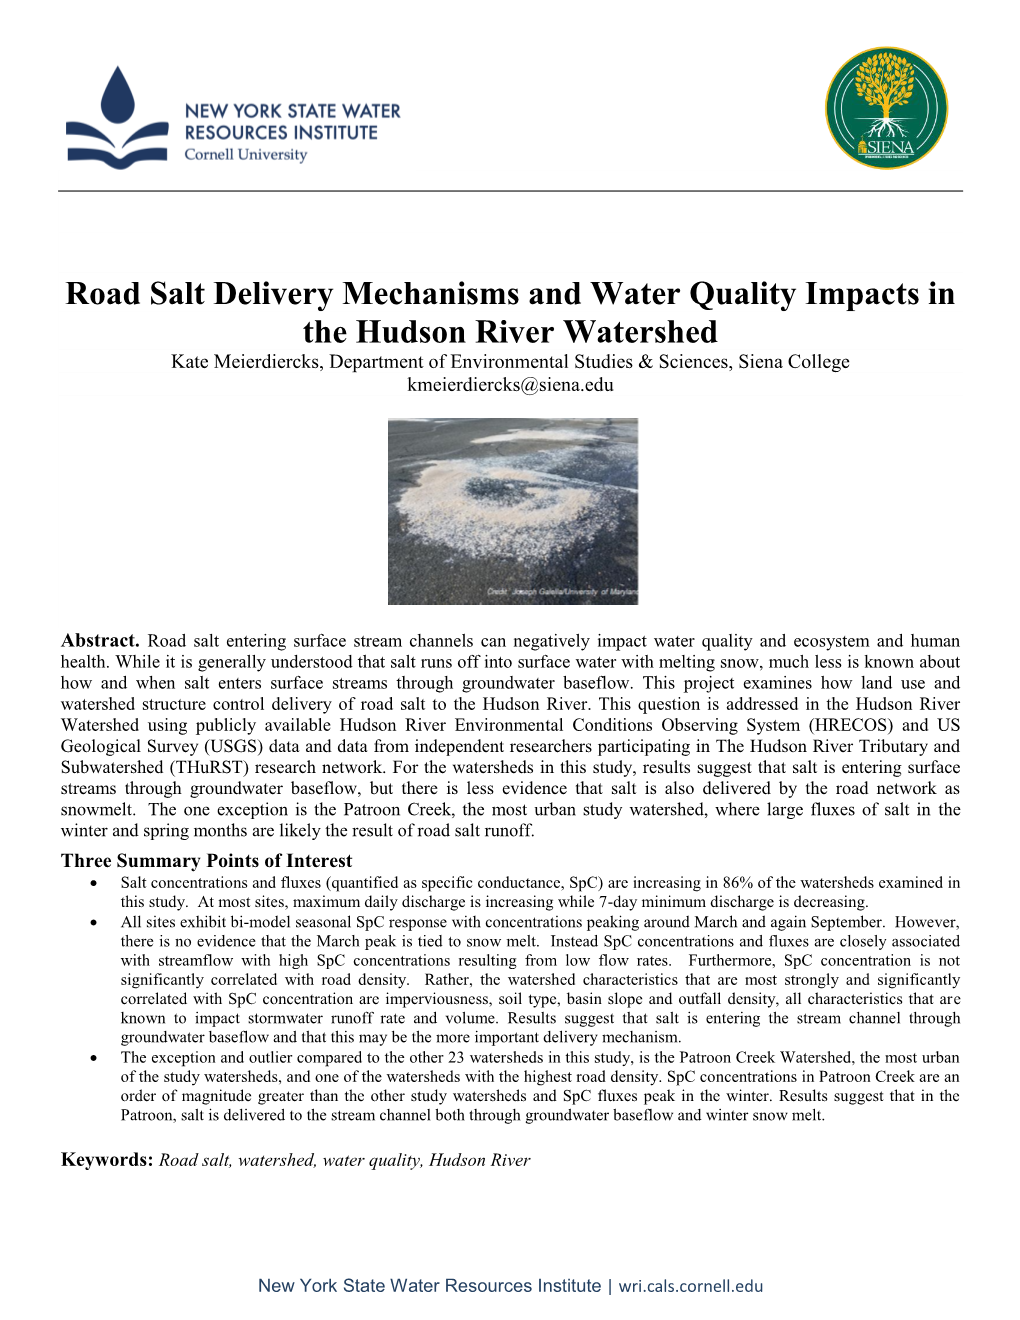 Road Salt Delivery Mechanisms and Water Quality Impacts in the Hudson River Watershed